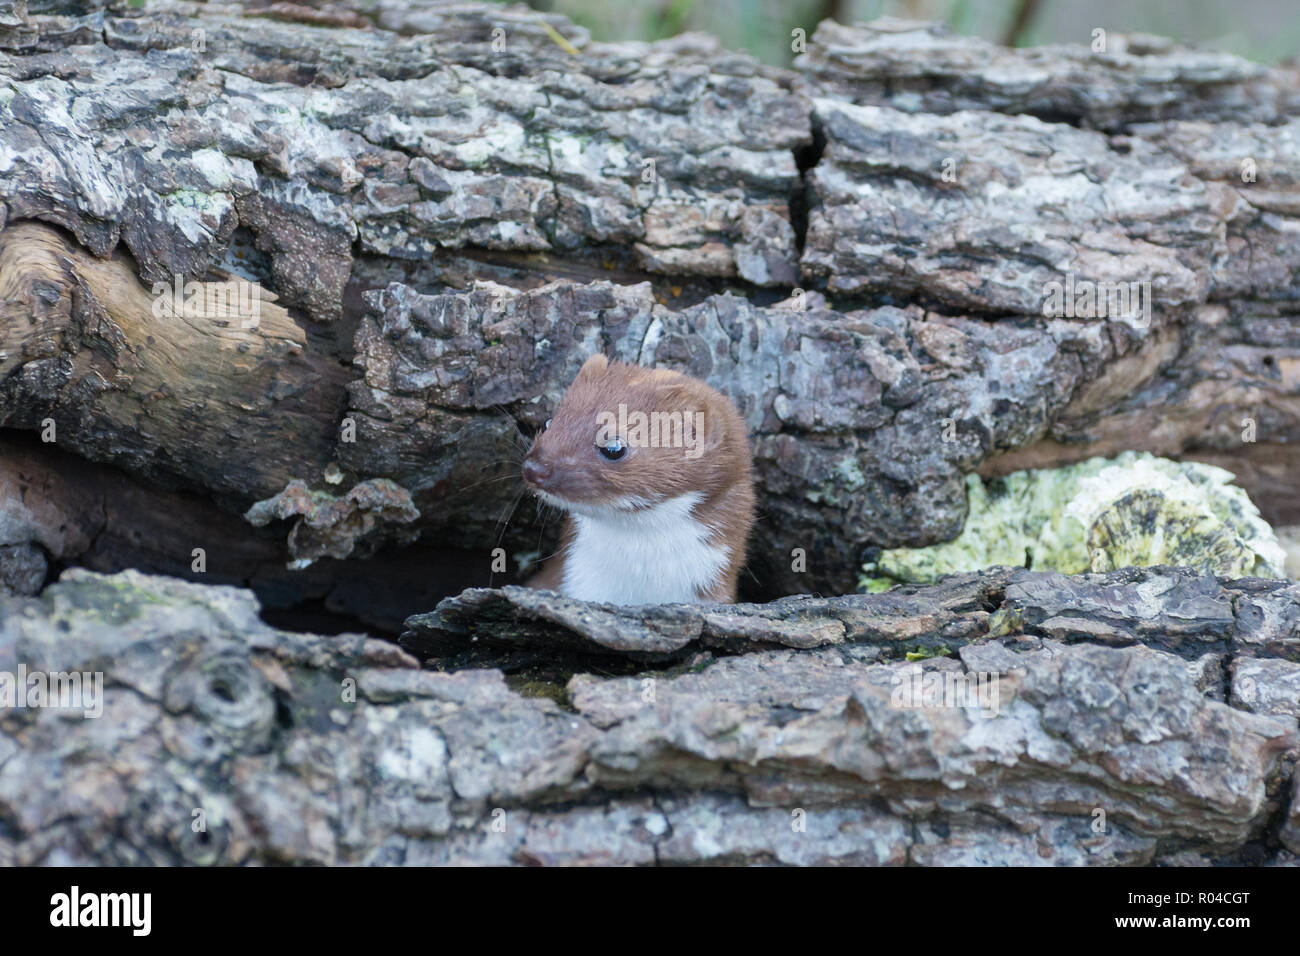 Weasel (Mustela nivalis) peeking out of a hole in a log pile. The weasel is the smallest member of the mustelid family of mammals, and a carnivore Stock Photo